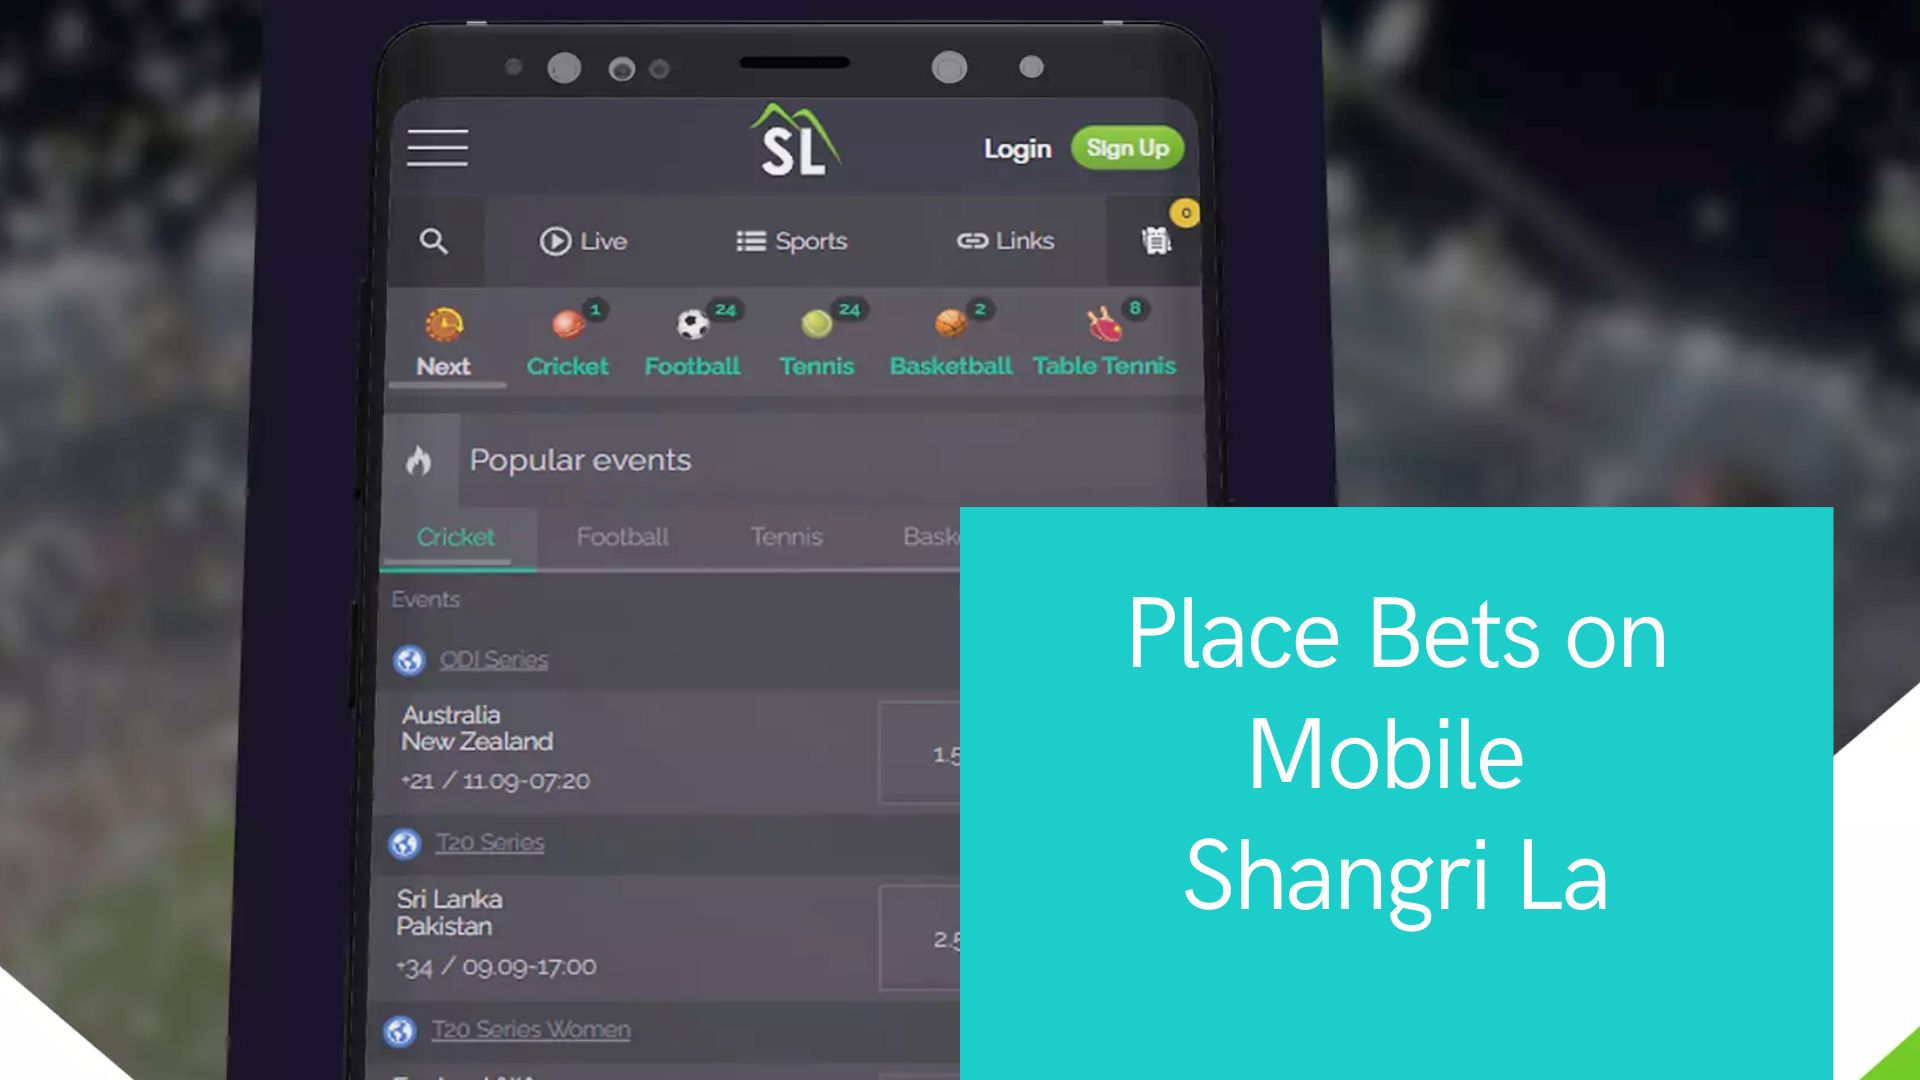 Shangri la casino How to Place Bets on Mobile? 